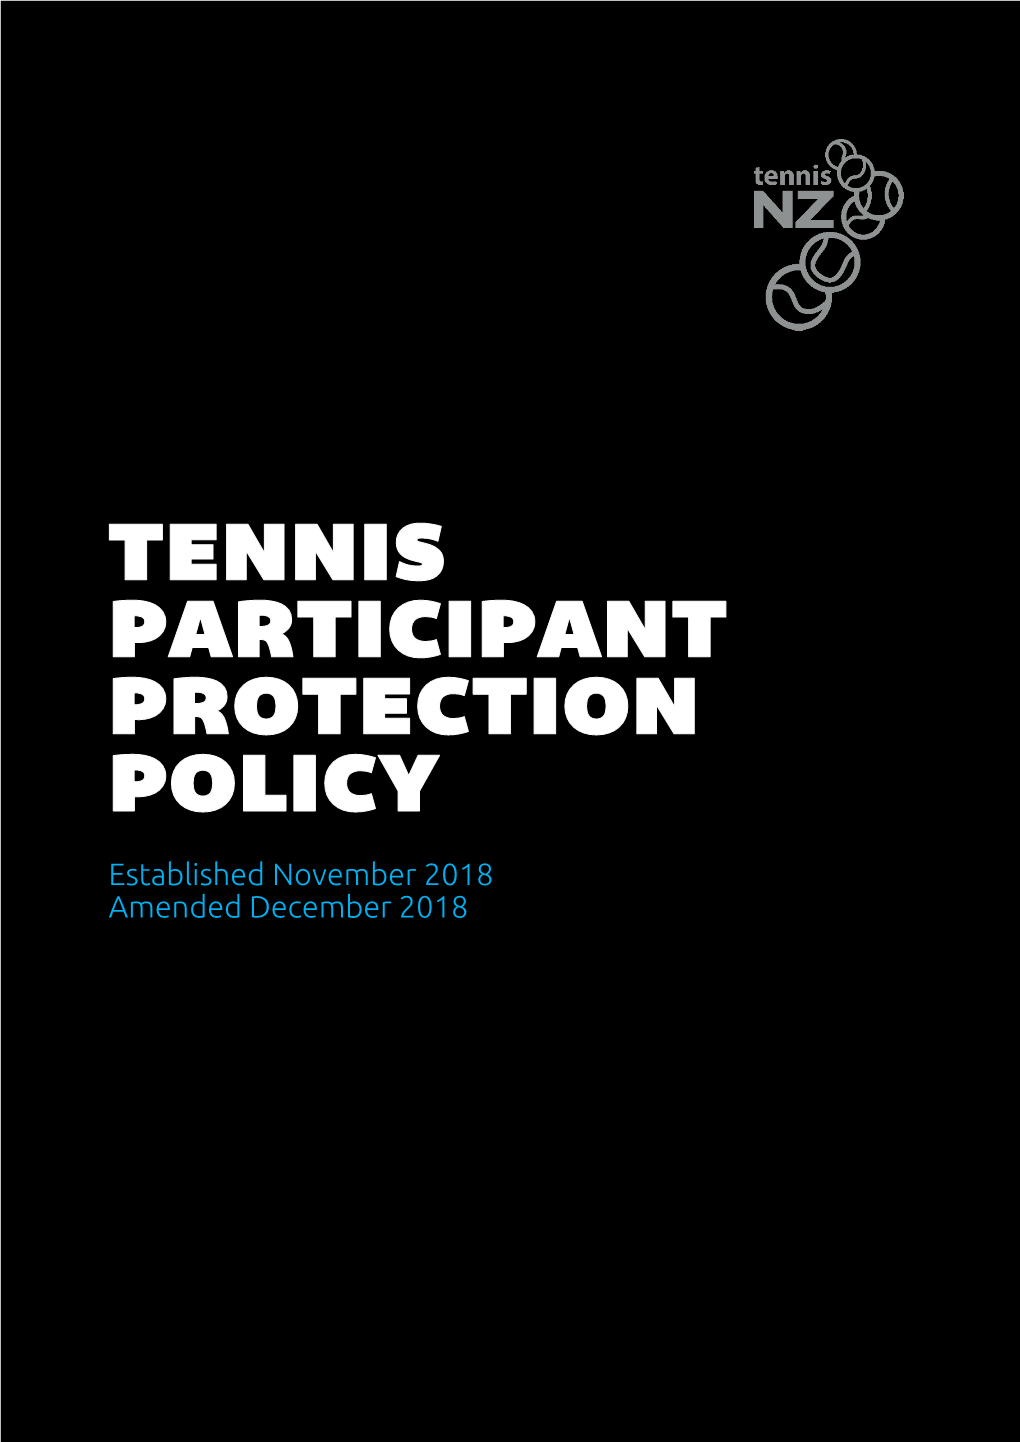 Tennis NZ Participant Protection Policy